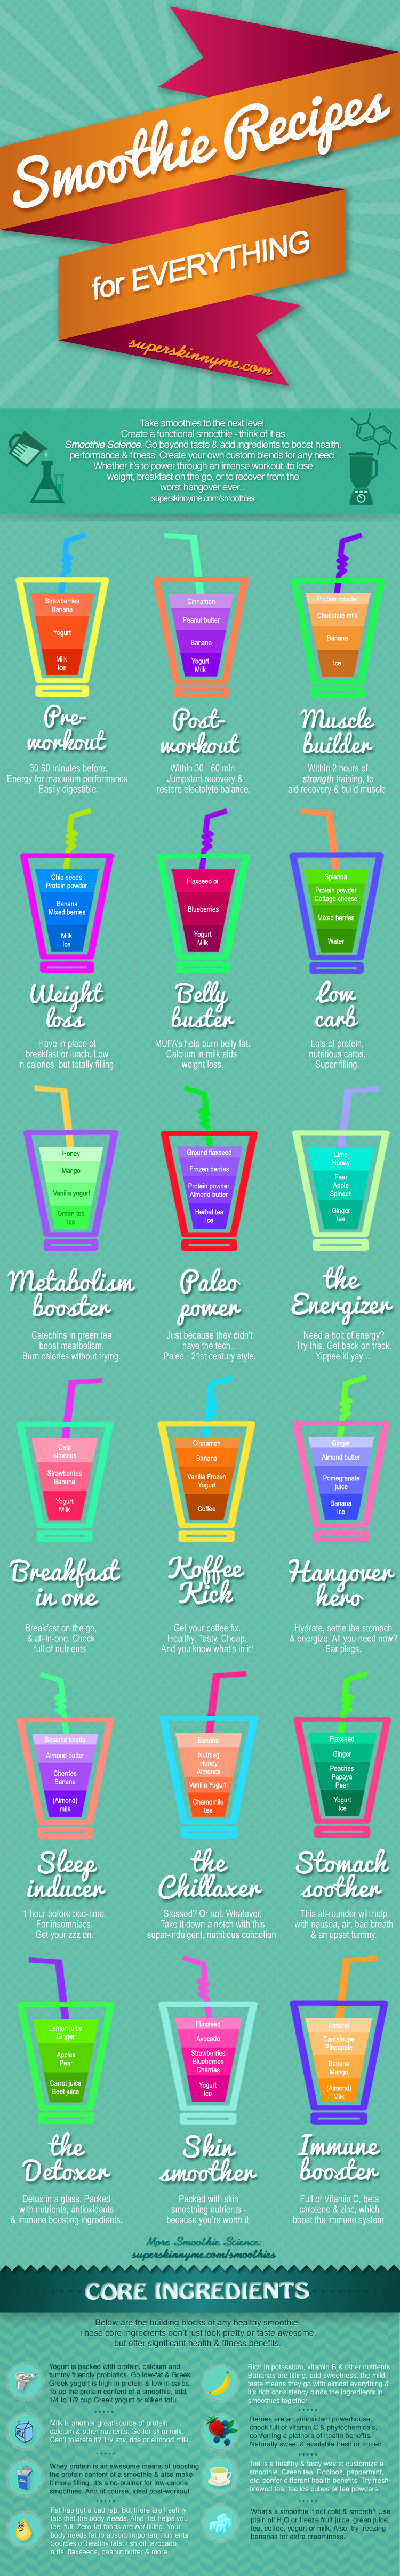 Healthy Smoothie Recipes
 Healthy Smoothie Recipes for Everything [Infographic]